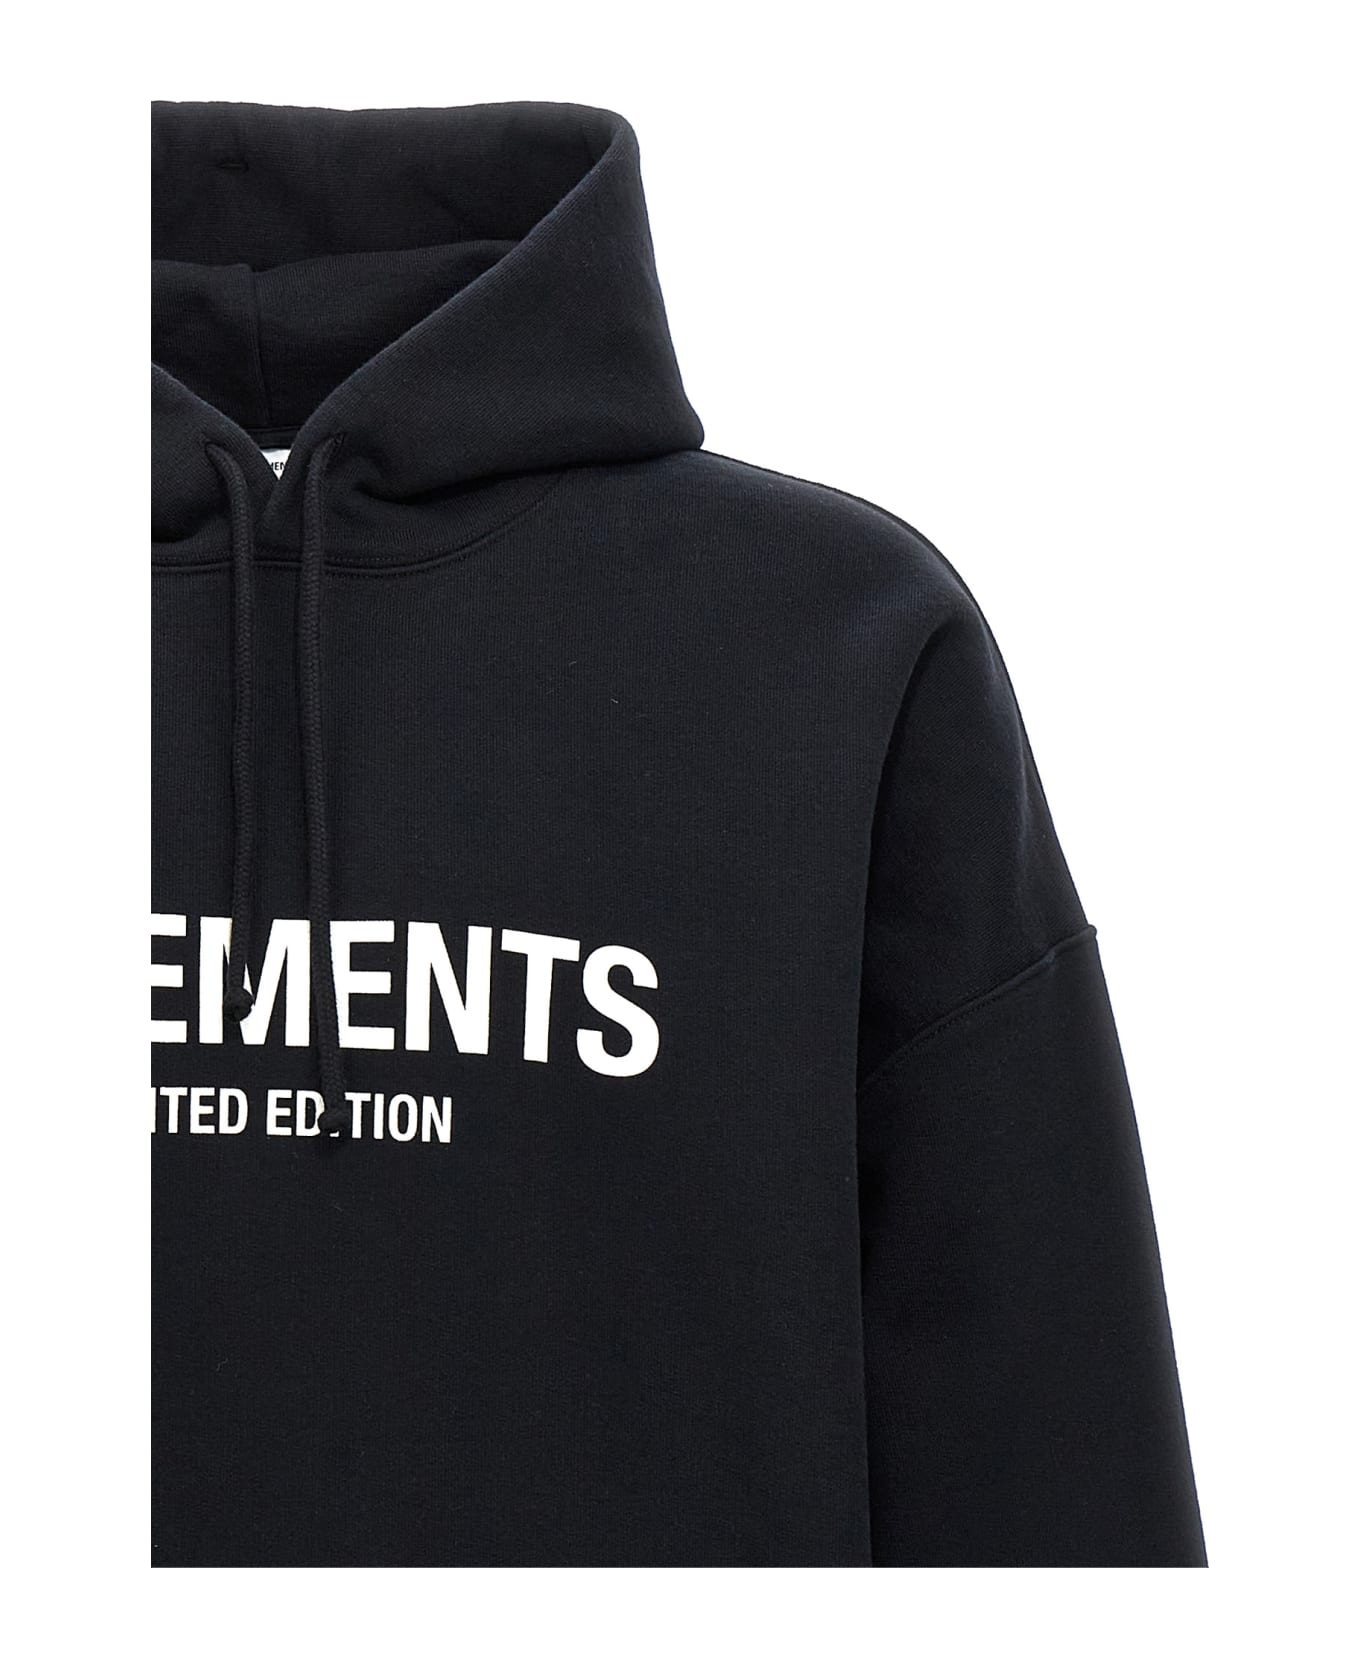 VETEMENTS 'limited Edition Logo' Hoodie - White/Black